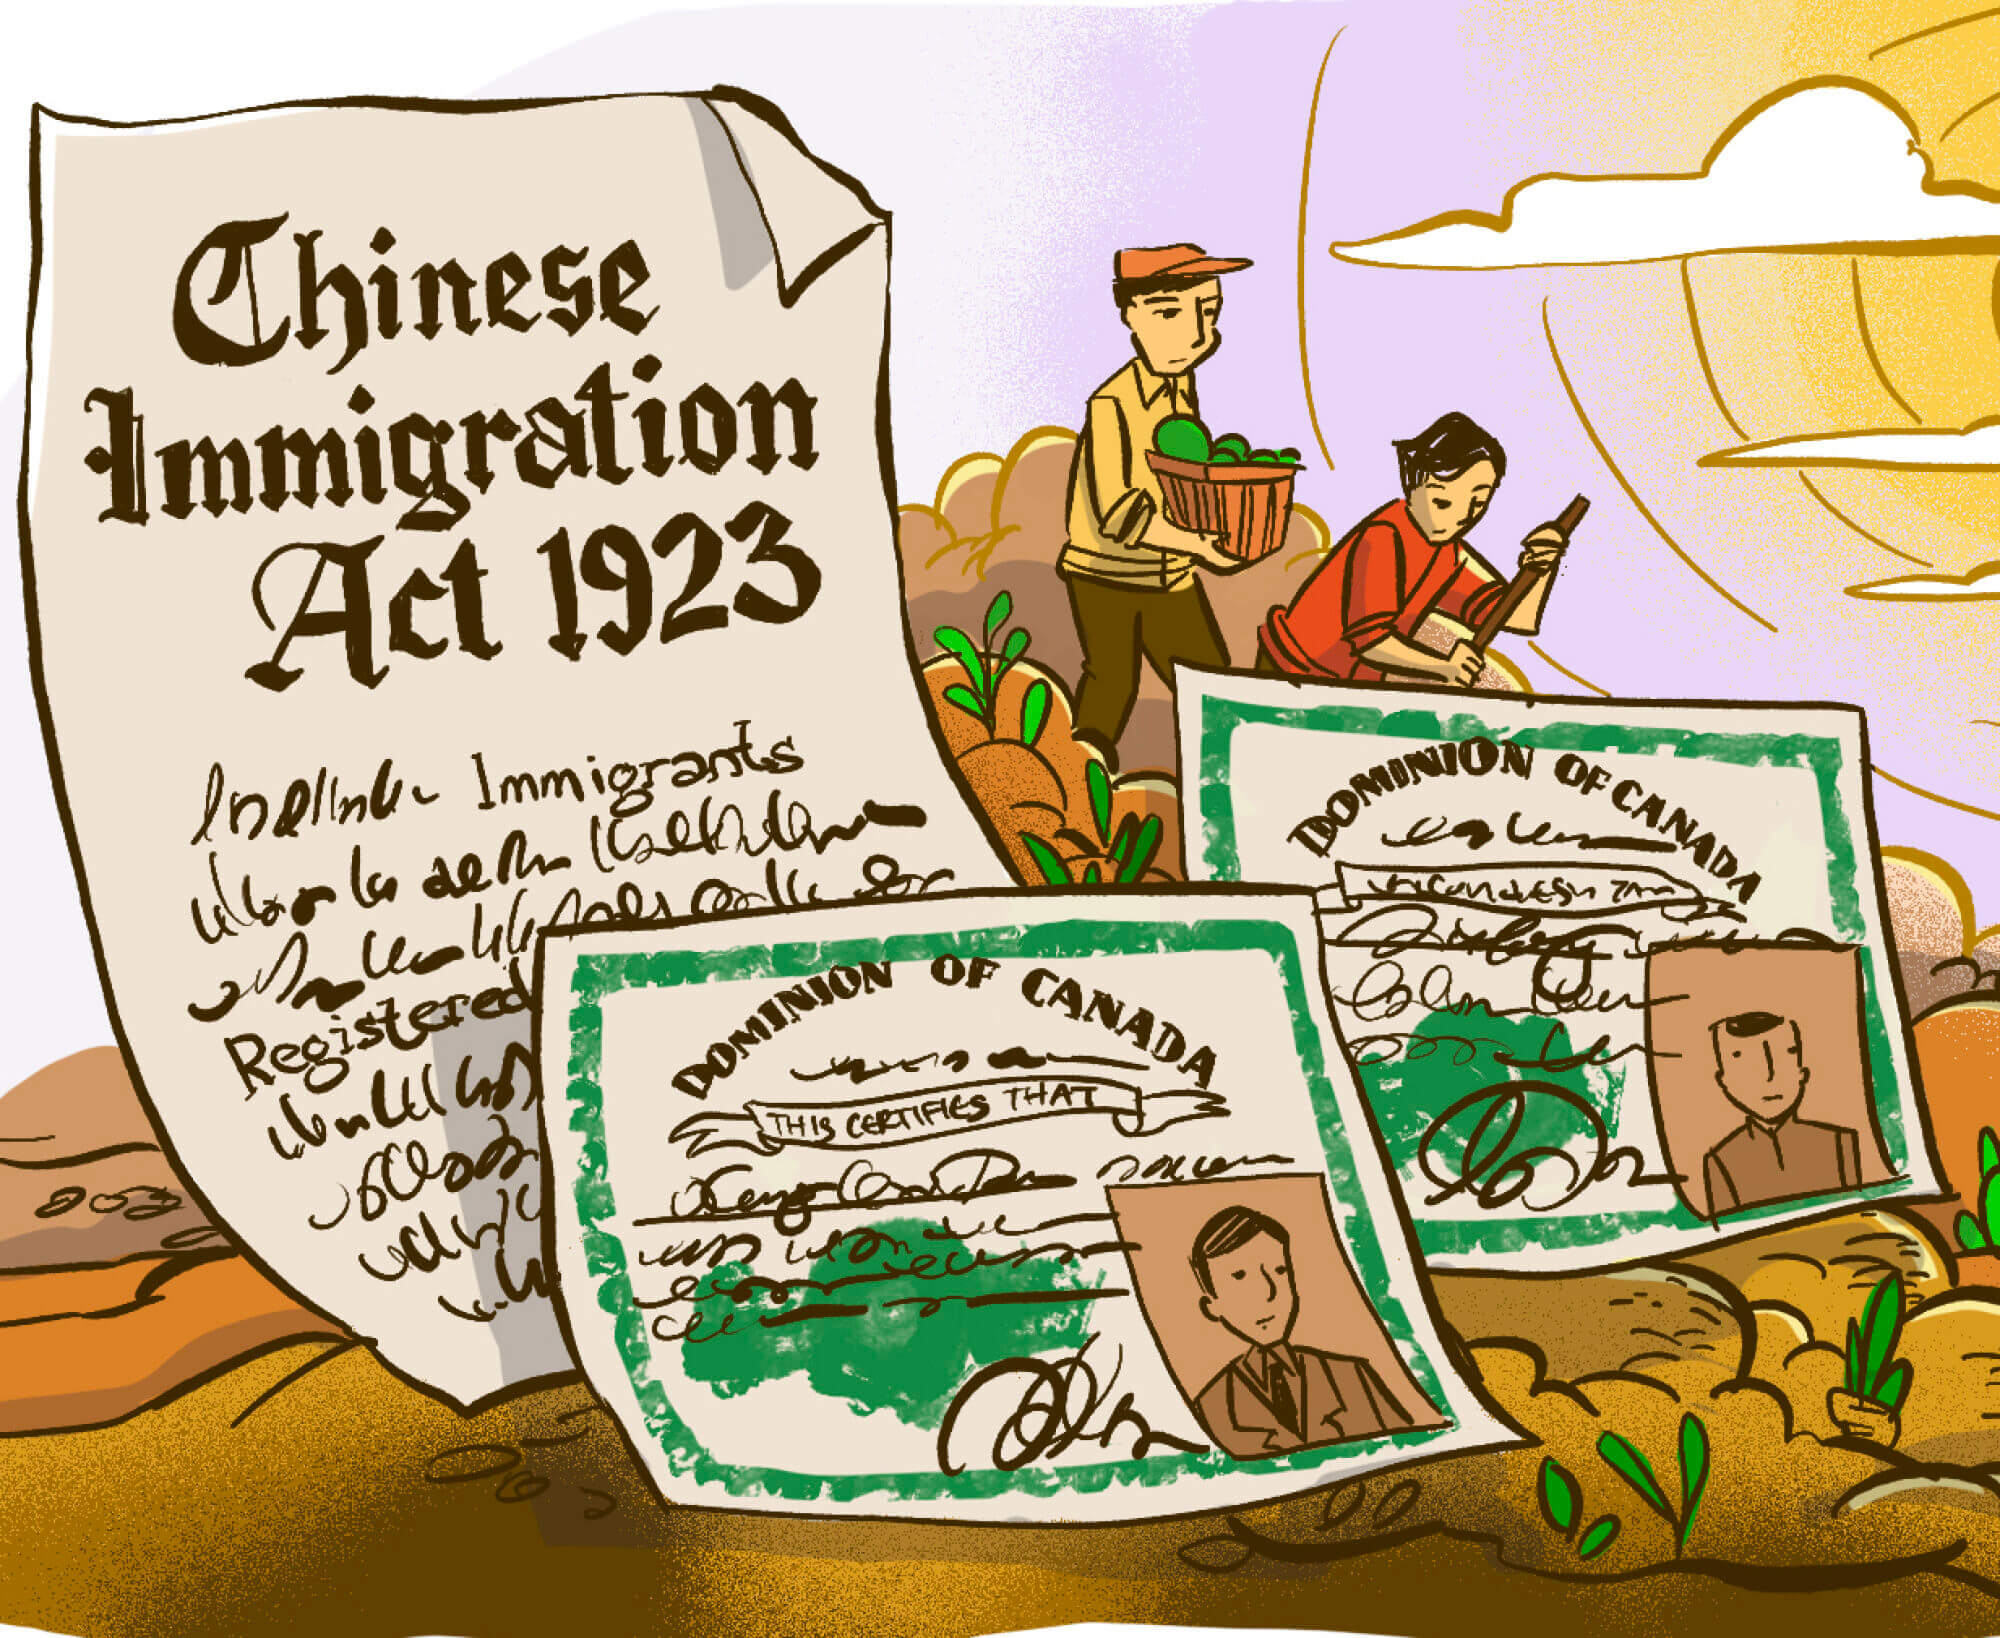 An illustration of Chinese Canadian farmers. On the right hand side of four people are working in a vegetable field against a background of farm house and a rising sun. On the left hand side is the illustration of several document, one titled Chinese Immigration Act 1923, and two immigration documents of the Chinese Canadian farmers.